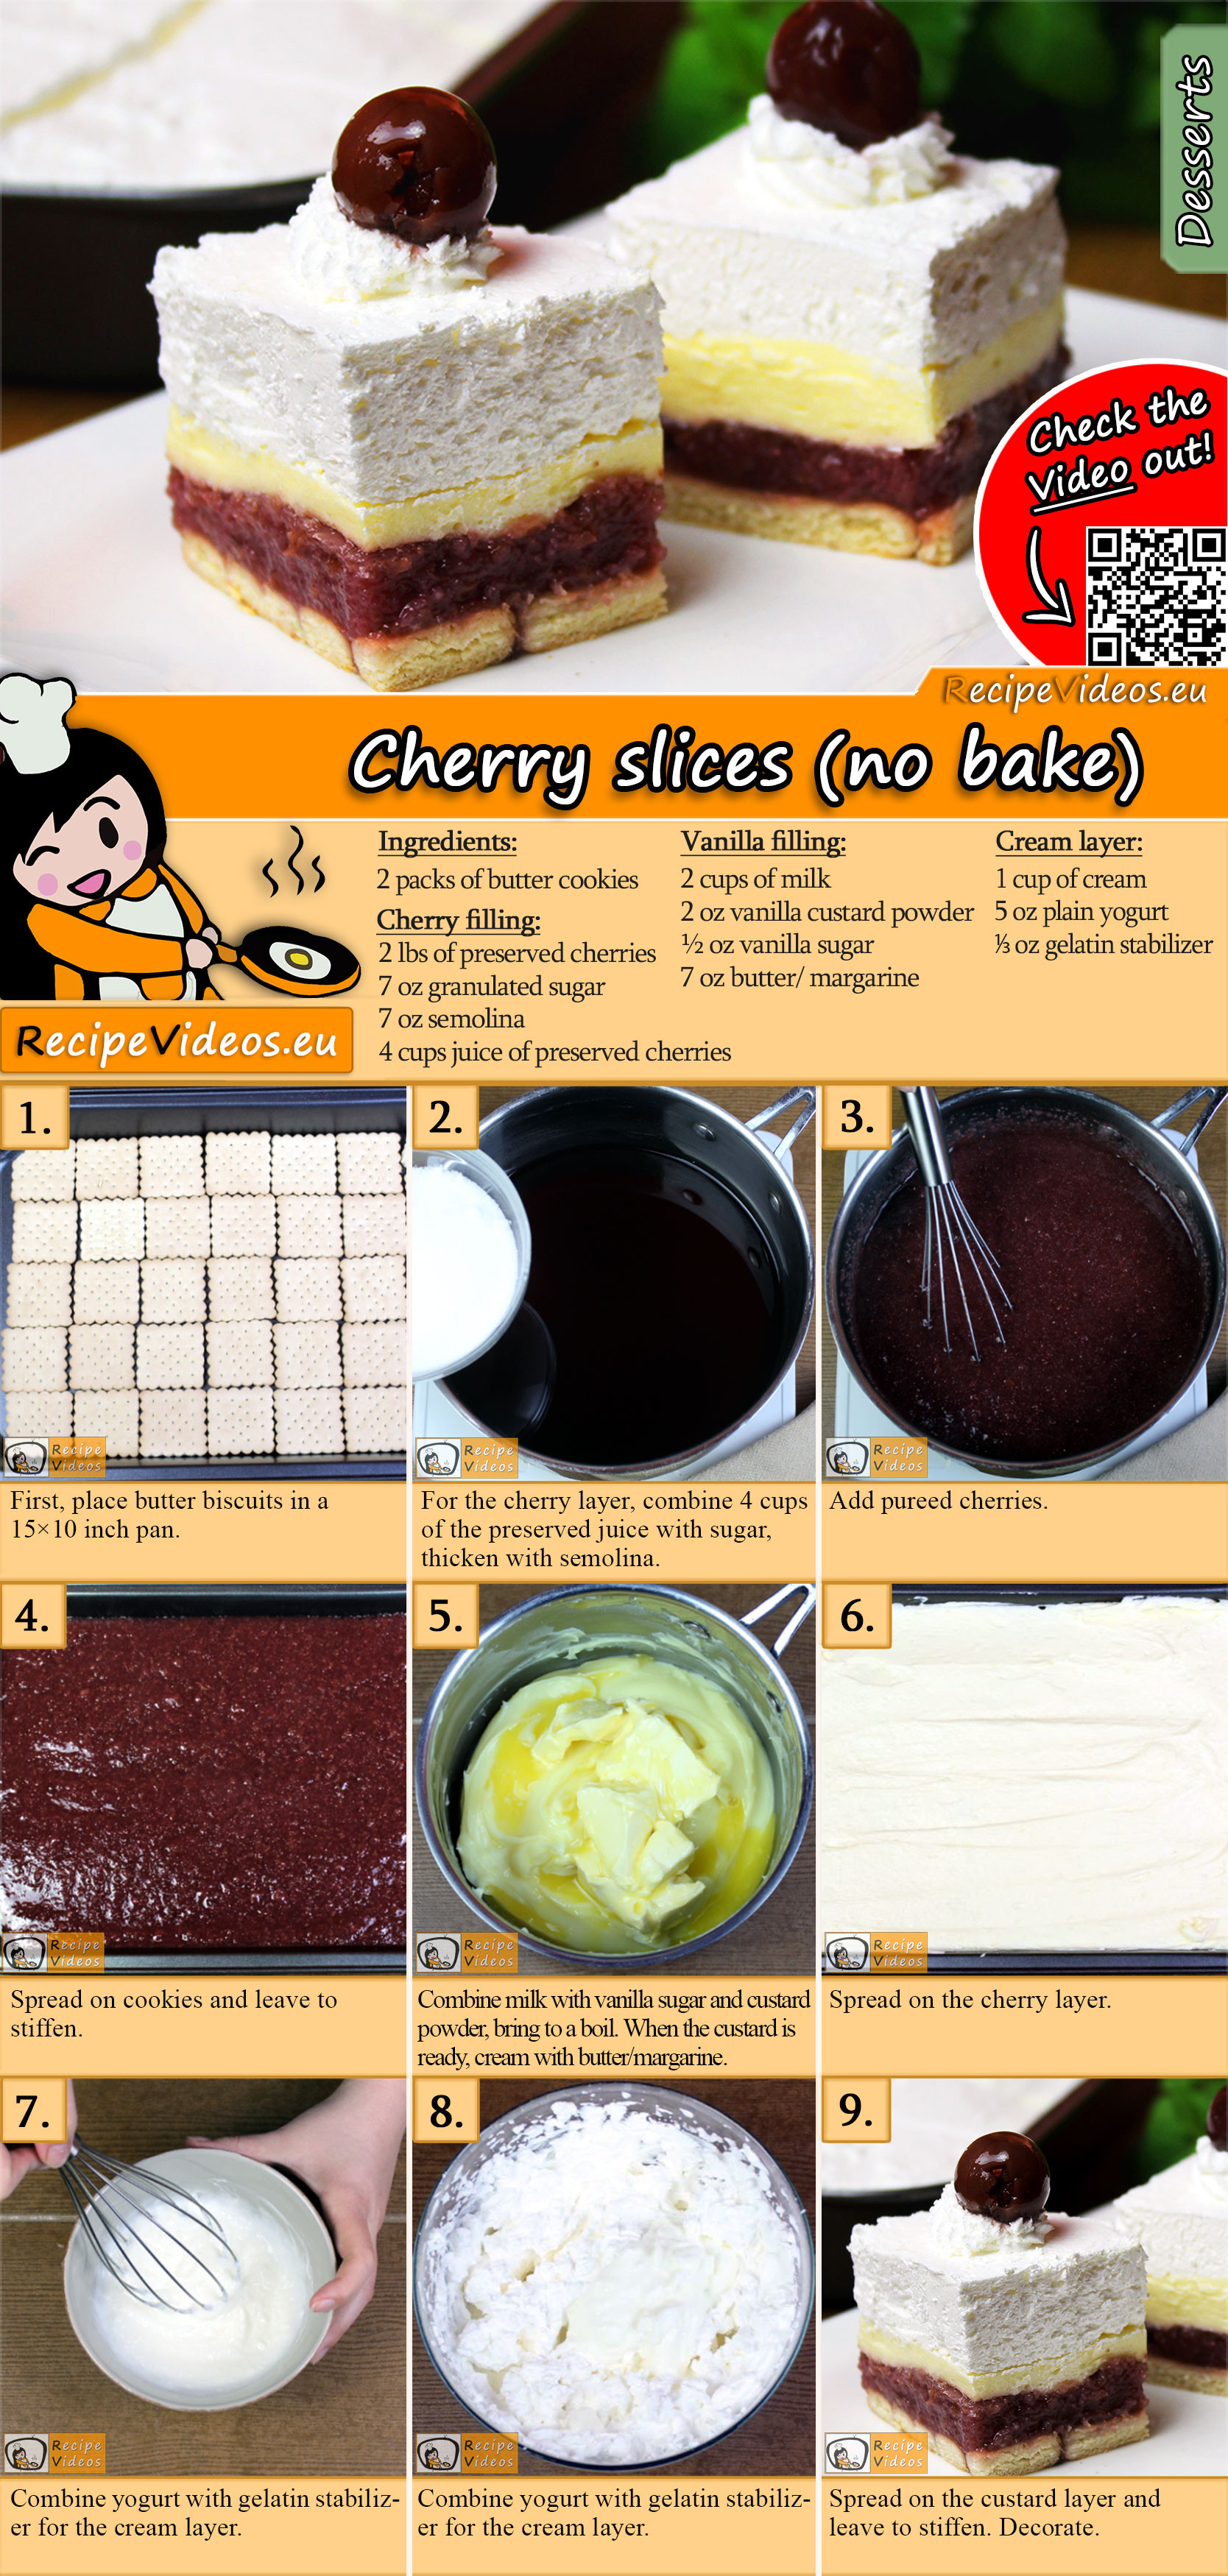 Cherry slices (no bake) recipe with video